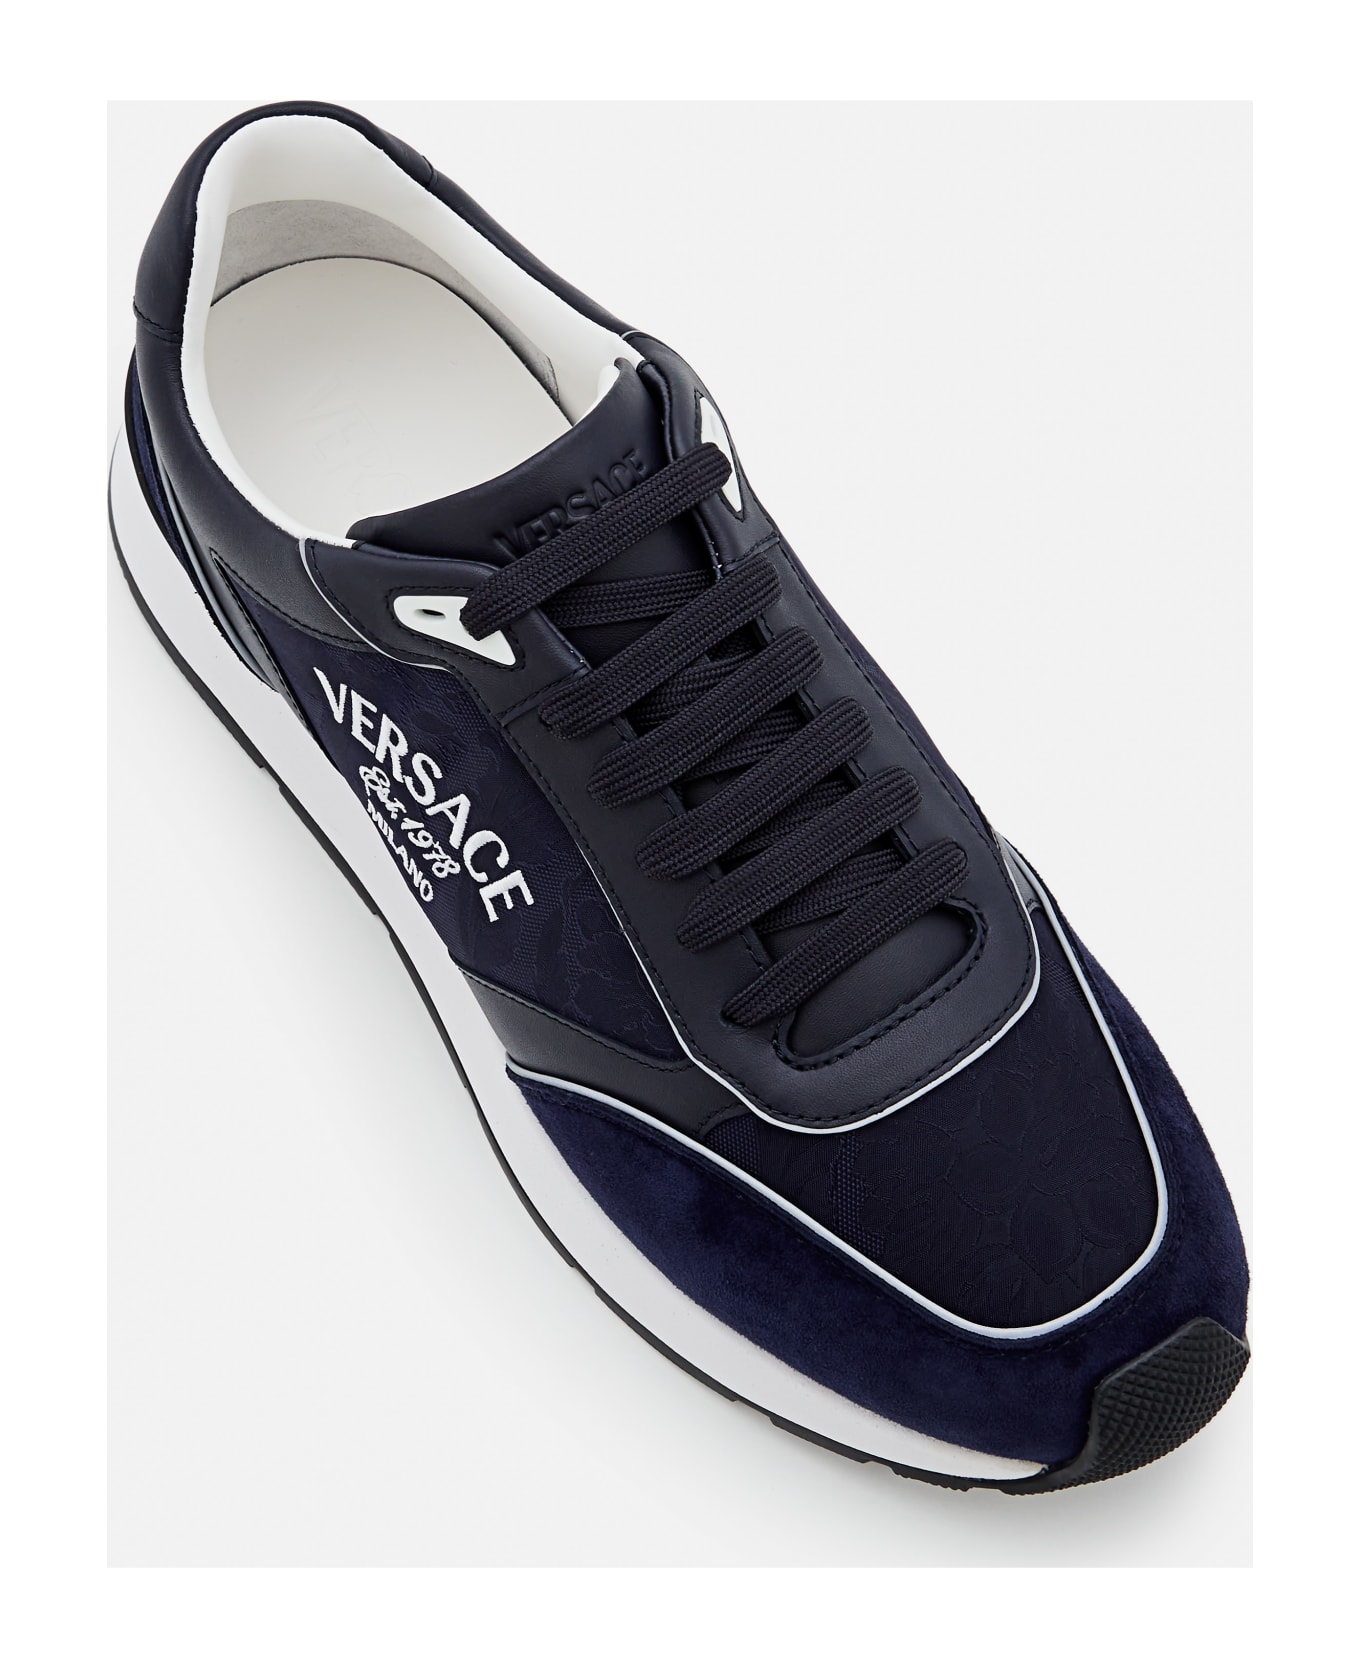 Versace Calf Leather Sneakers - Blue スニーカー